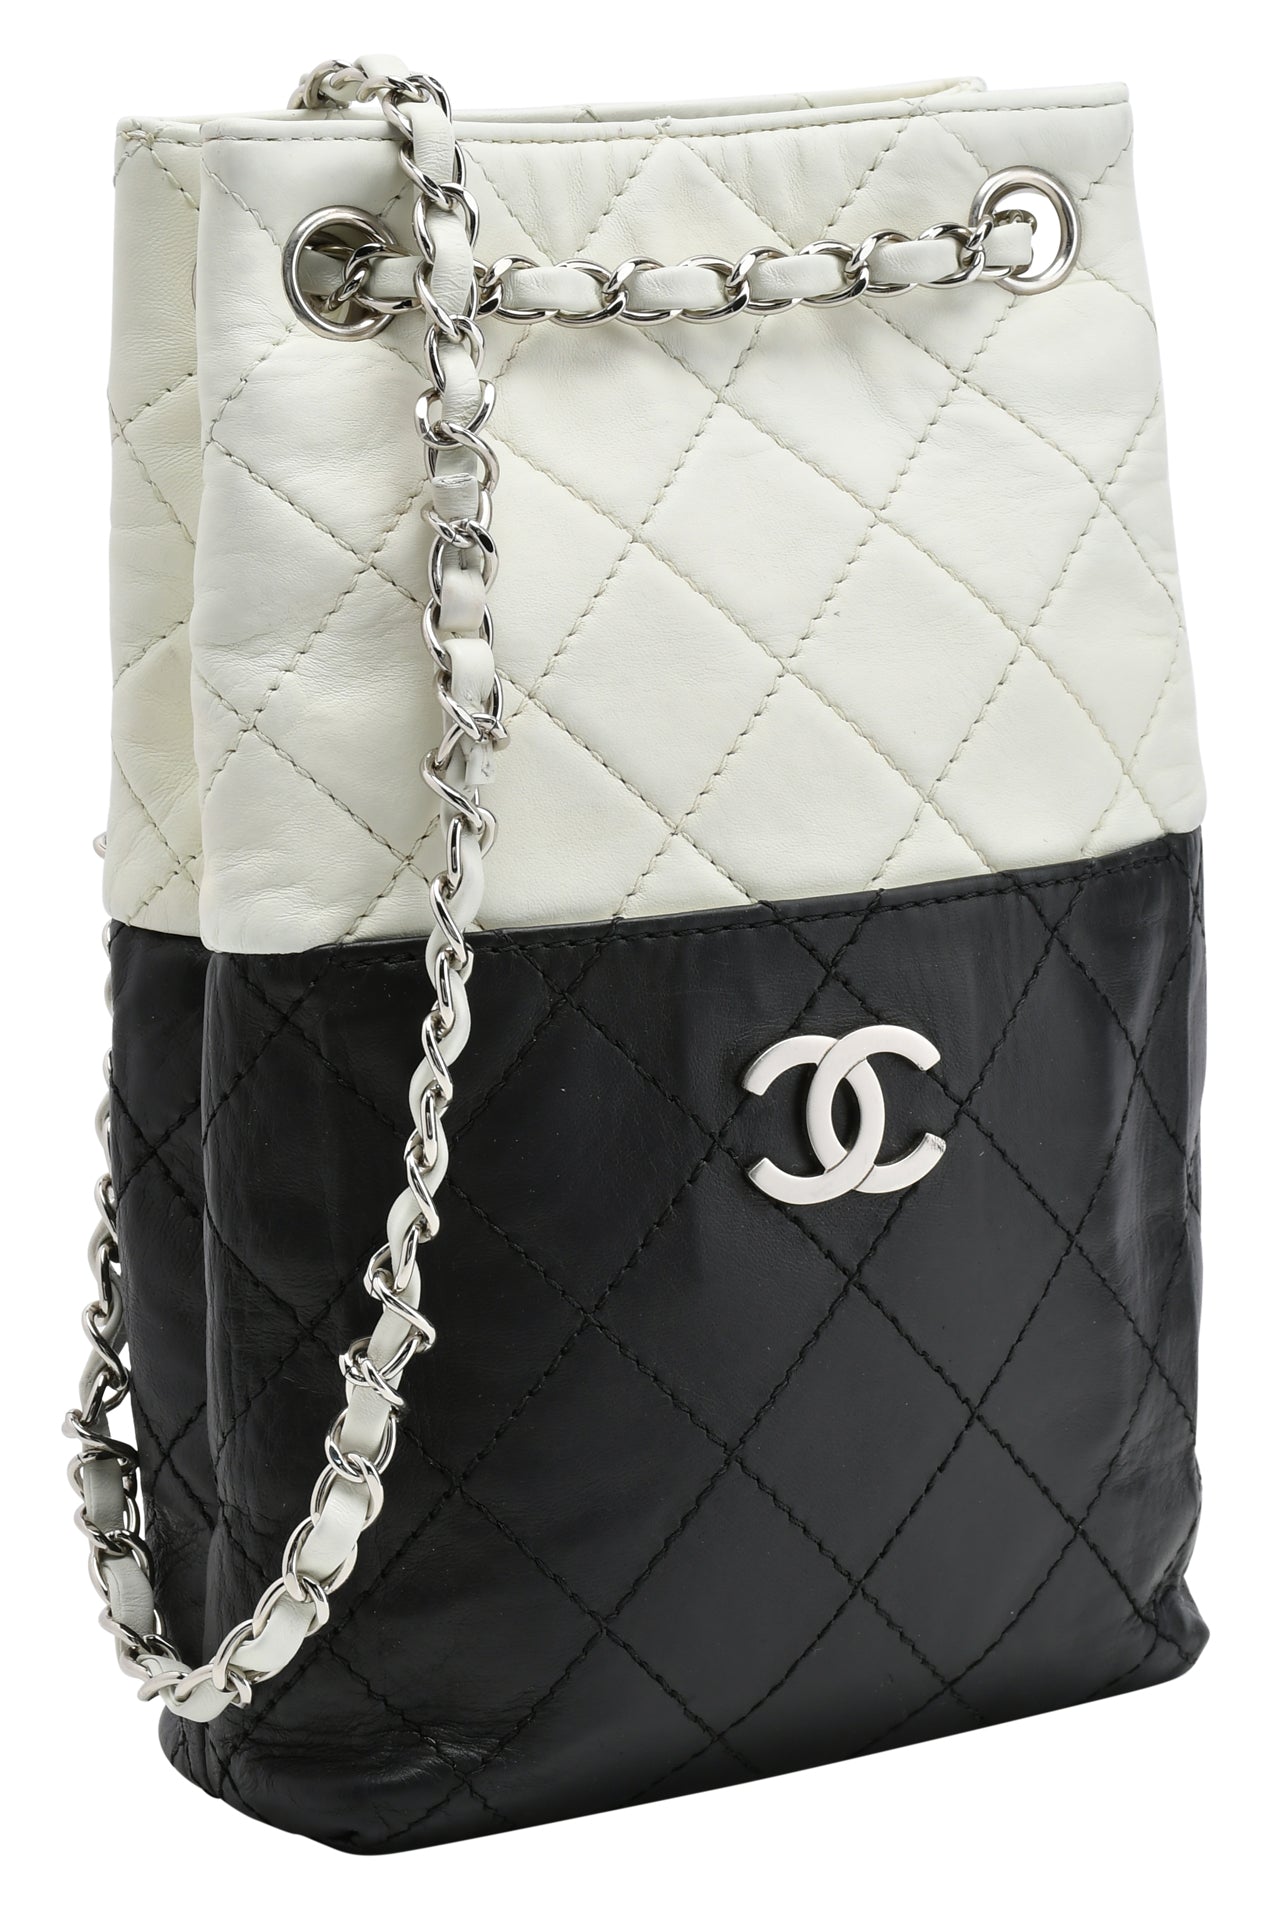 Chanel Gabrielle Hobo Bag Small Black/White in Calfskin with  Silver/Gold-Tone - GB